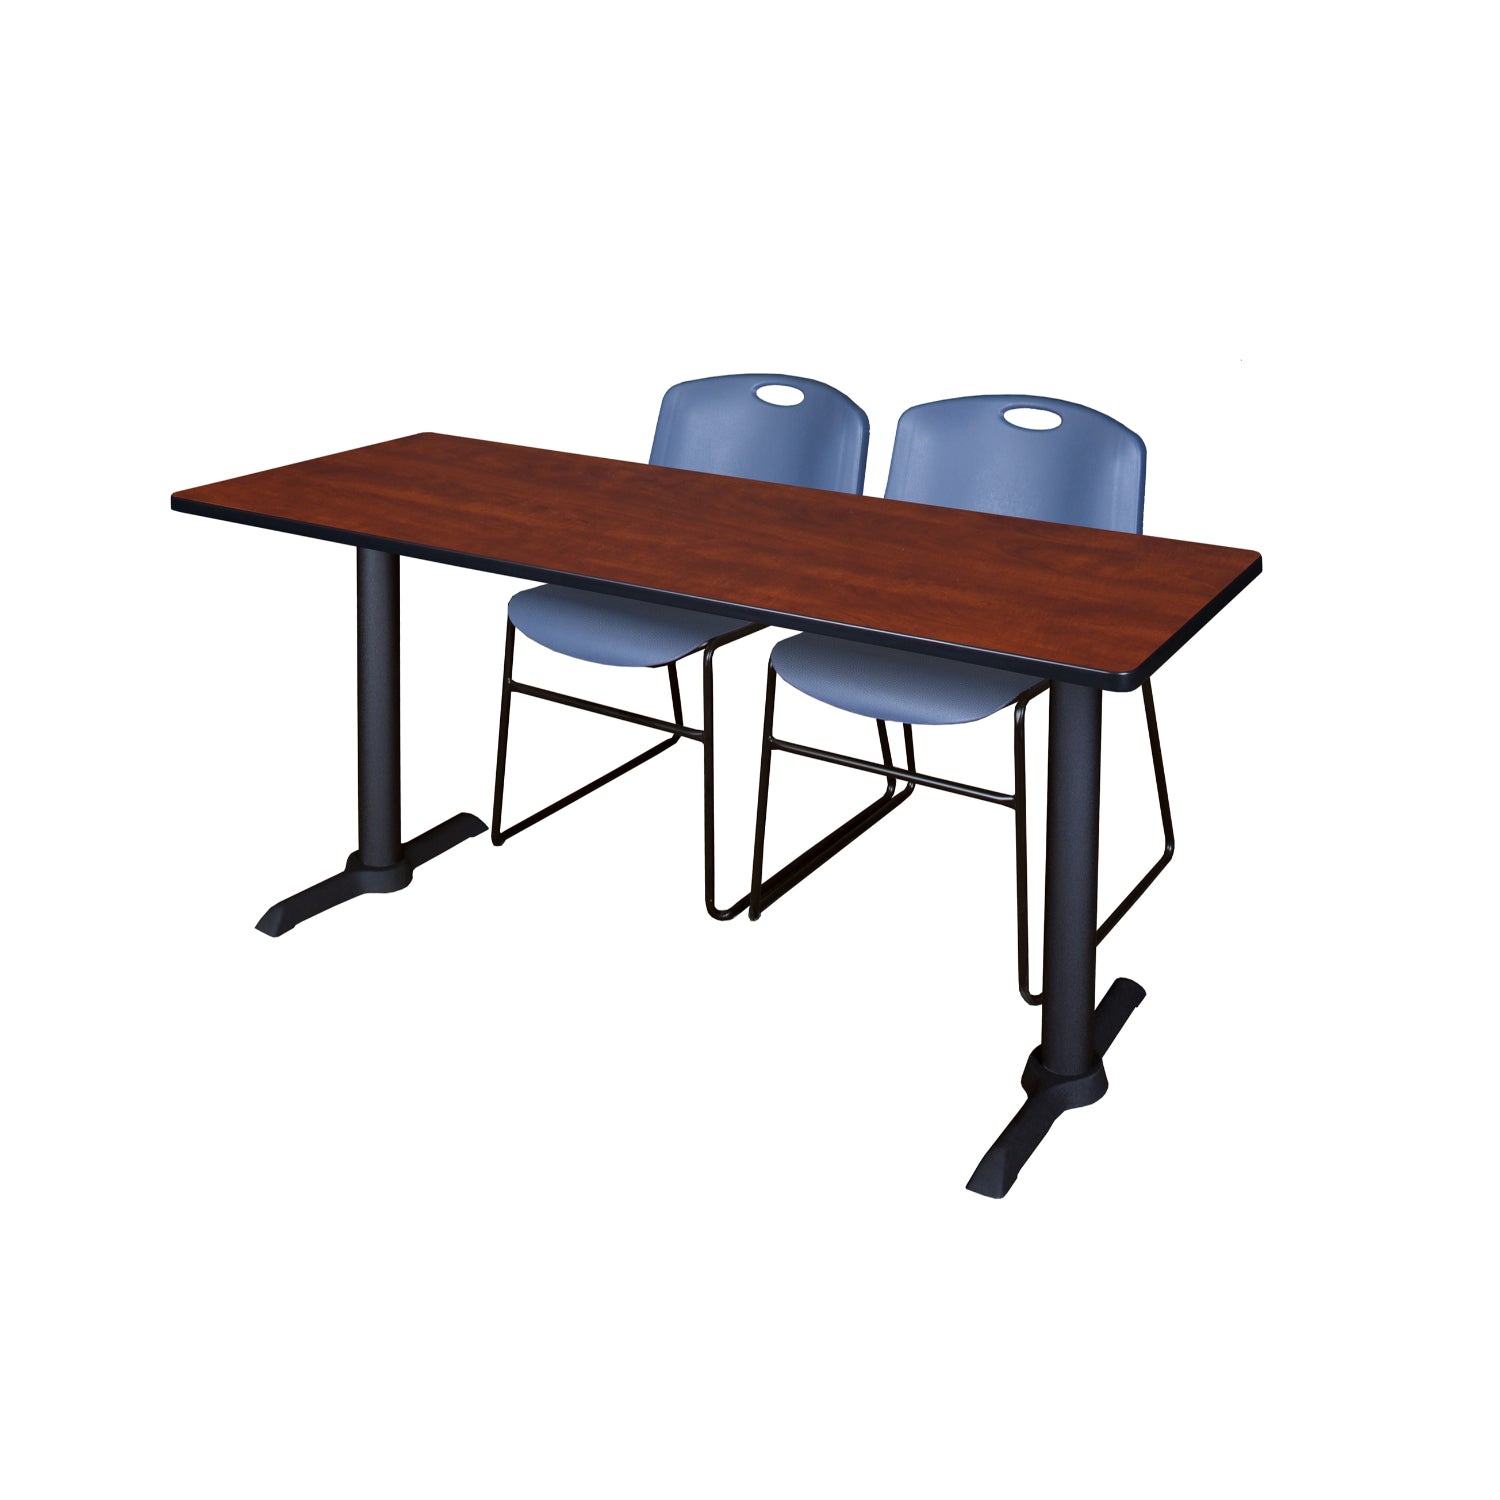 Cain Training Table and Chair Package, Cain 66" x 24" T-Base Training/Seminar Table with 2 Zeng Stack Chairs